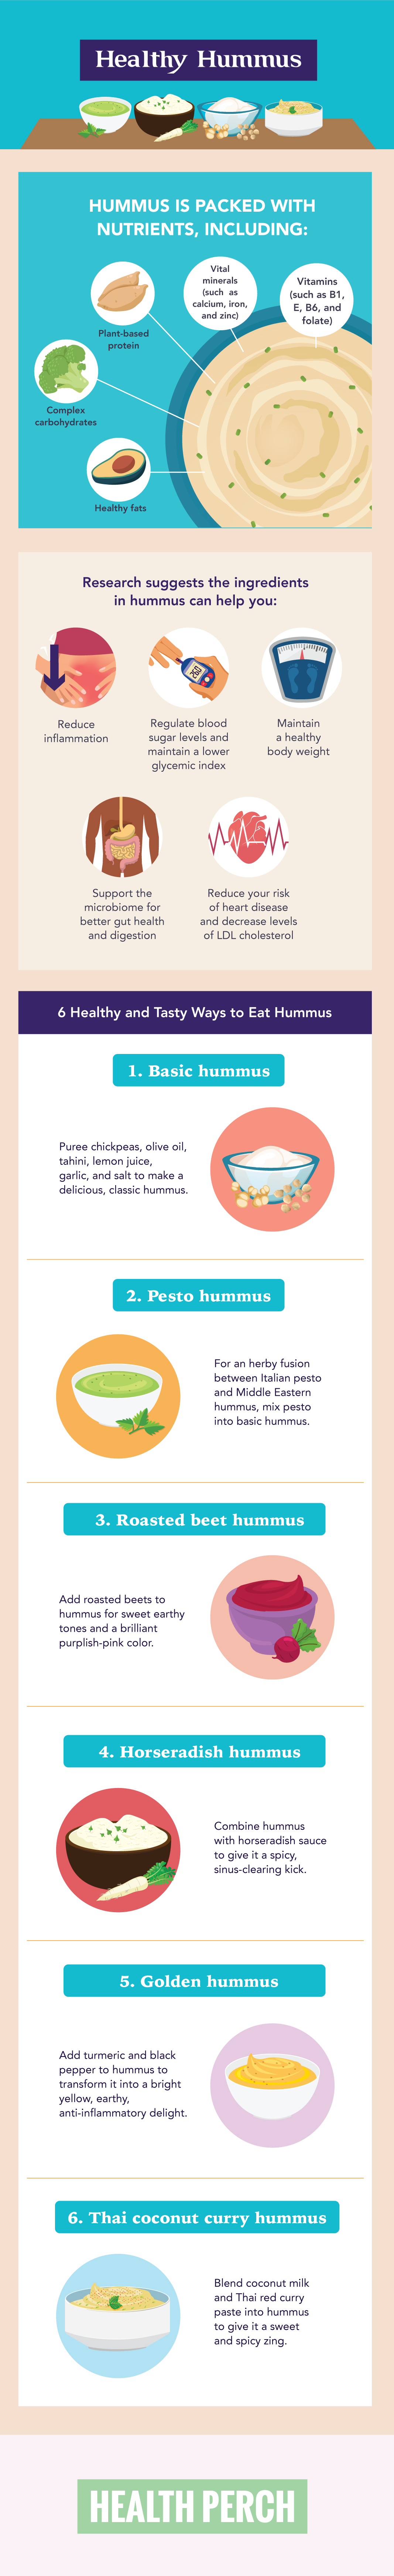 6 Healthy and Delicious Hummus Recipes for On-the-Go Snacking